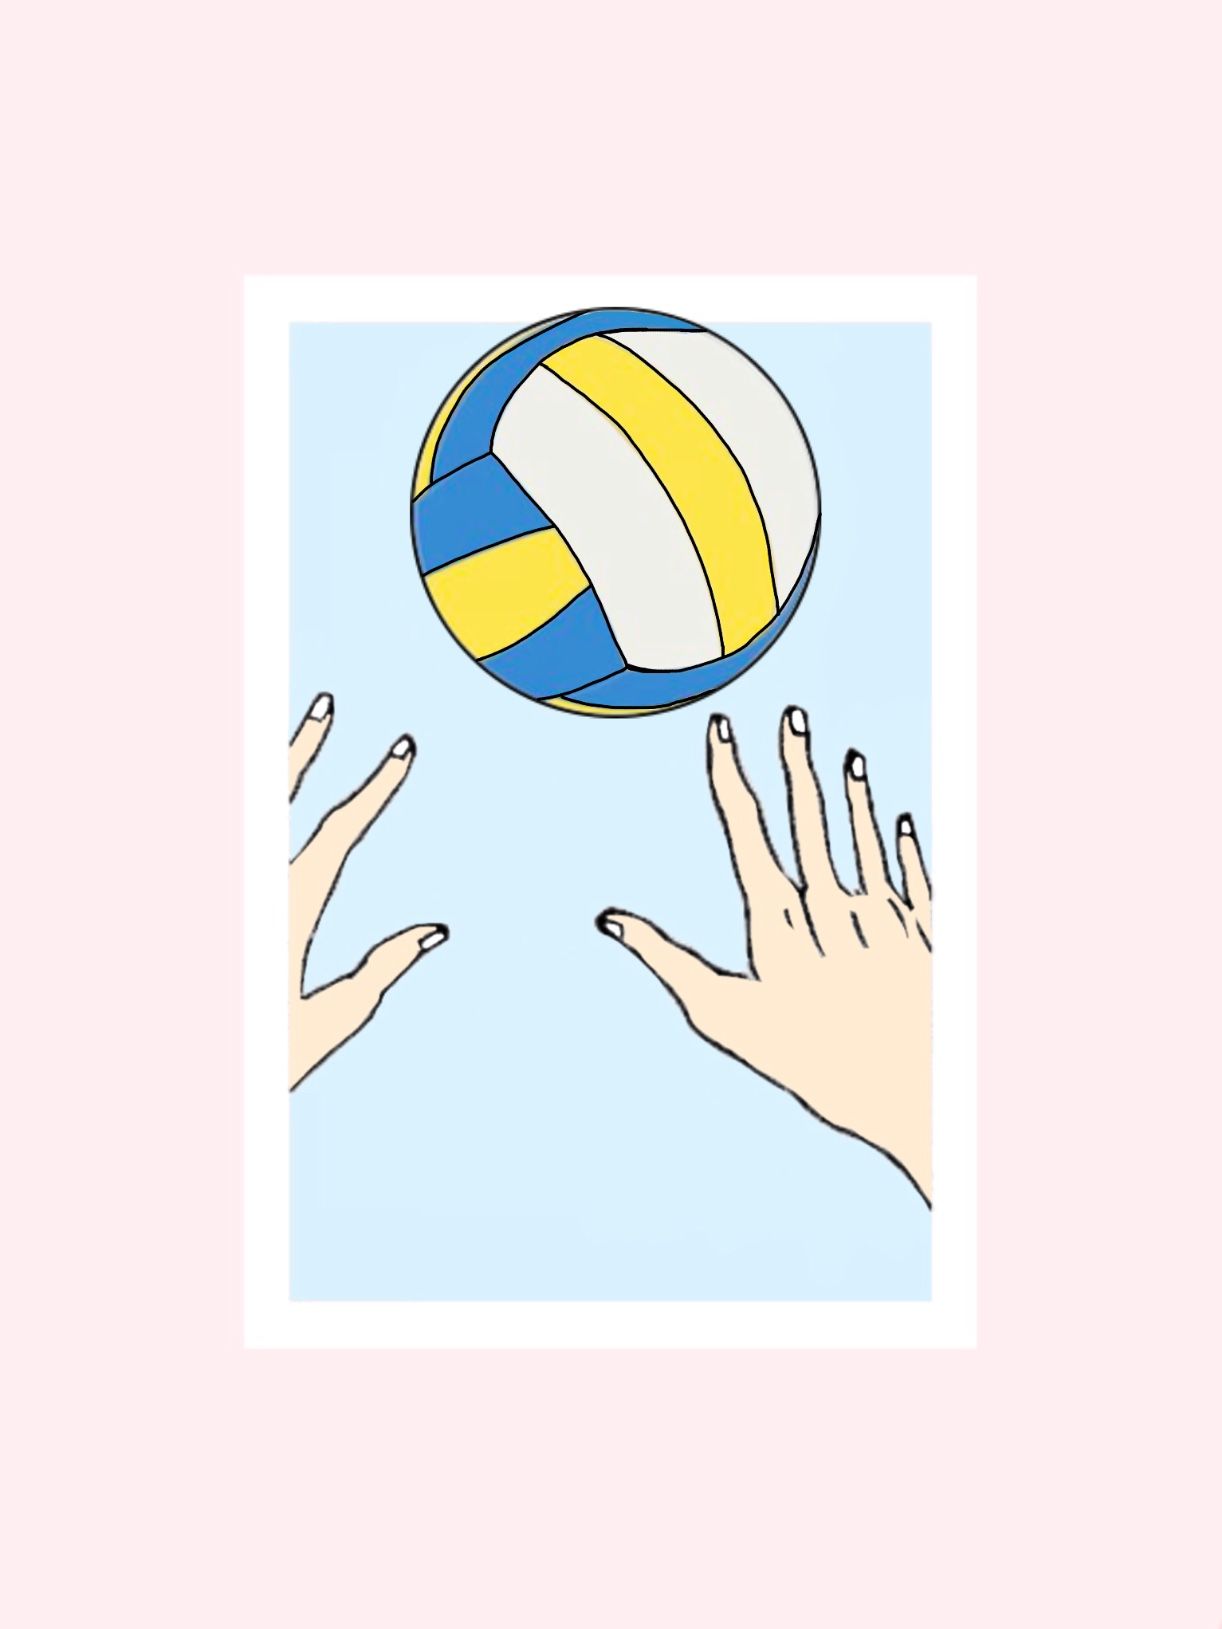 volleyball wallpaper for iphone,volleyball,logo,ball,volleyball player,graphics